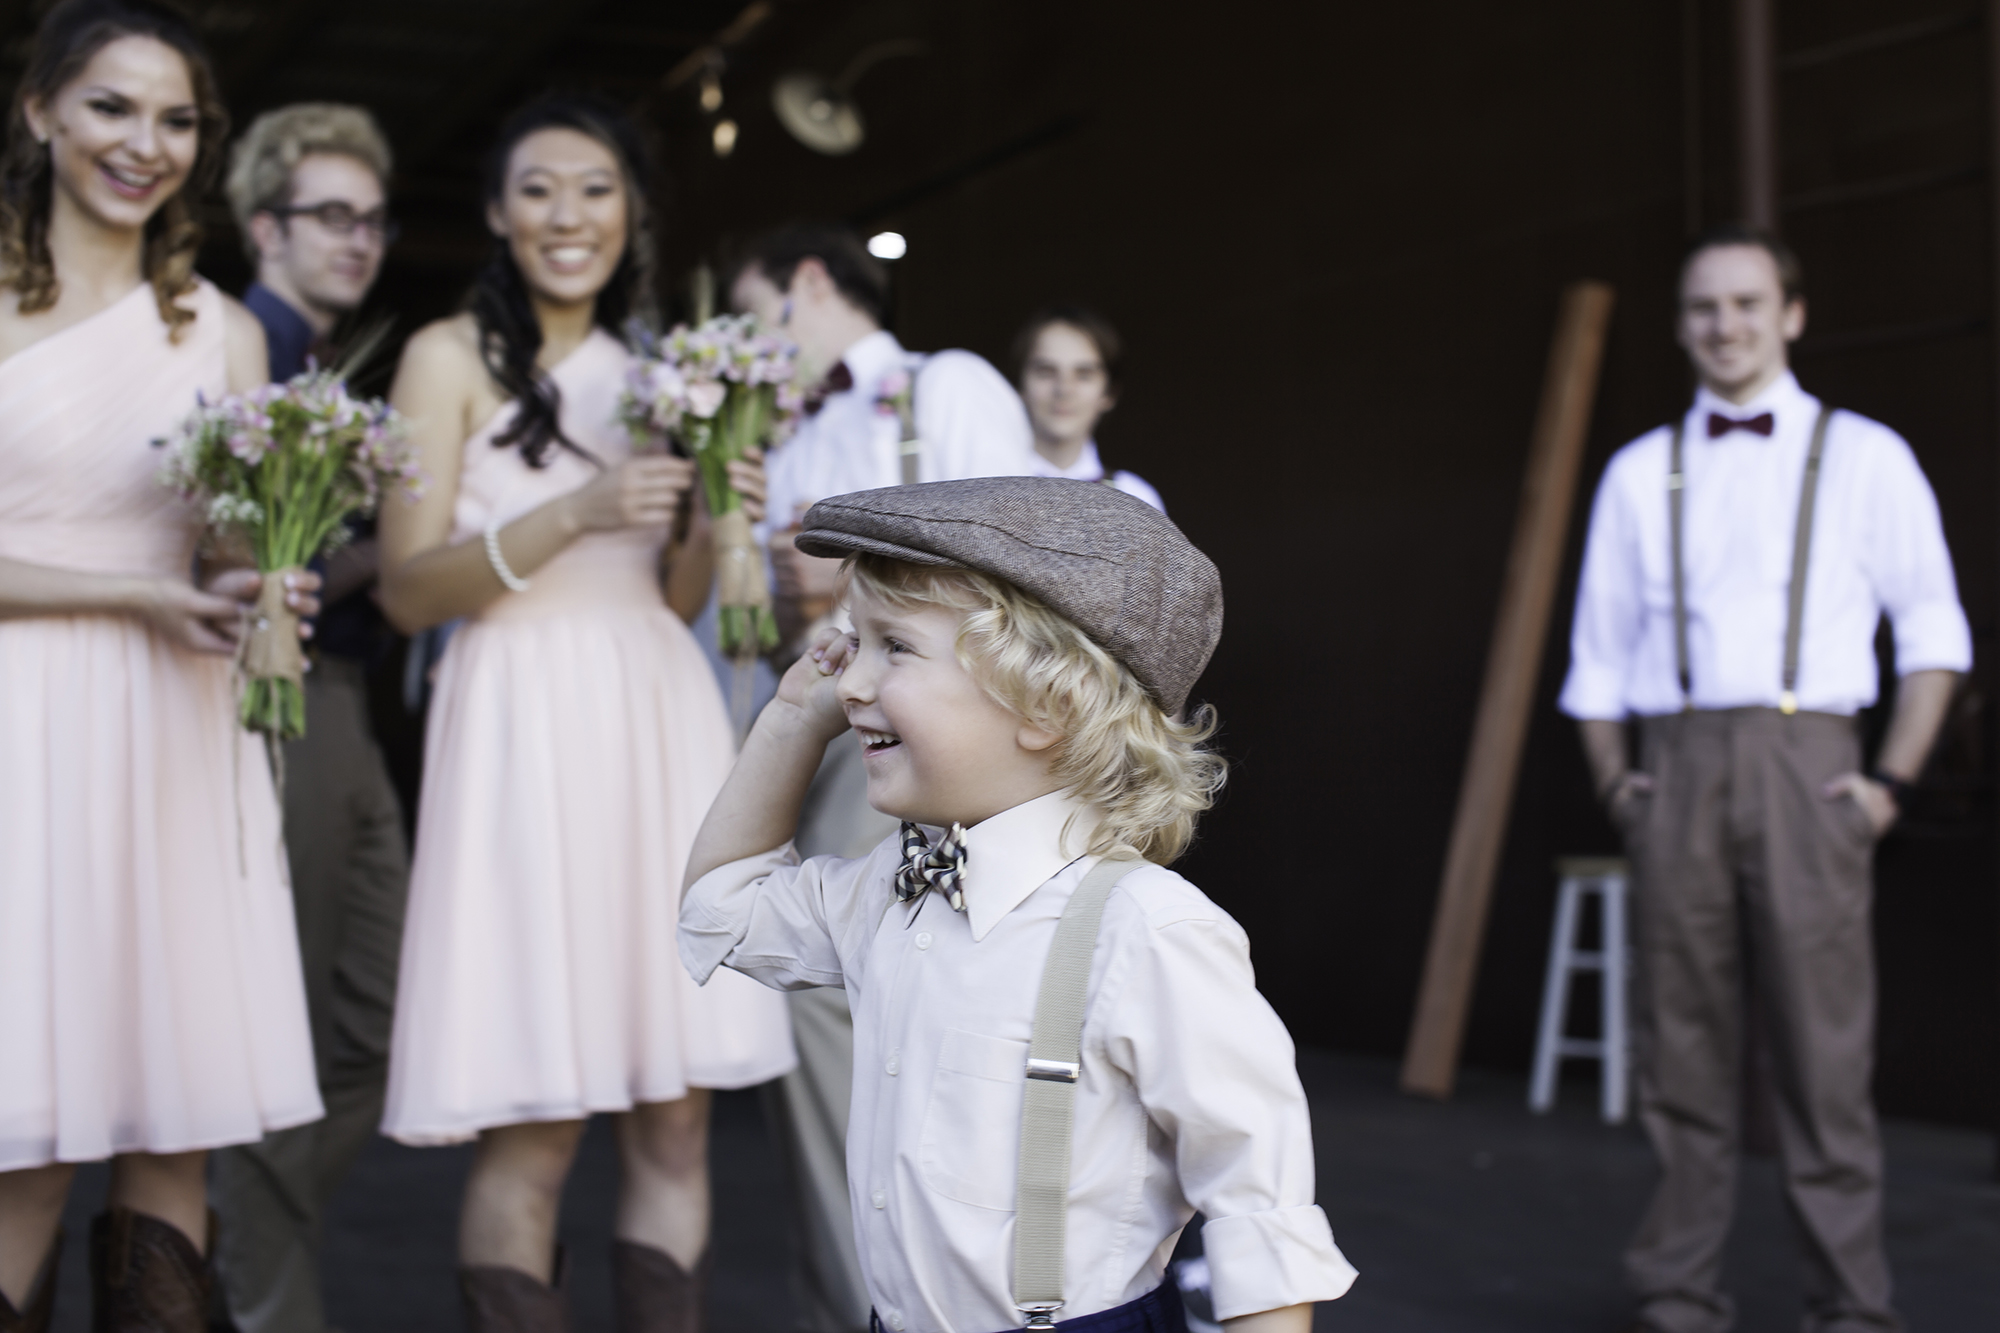 Ring bearer cracking up the wedding party